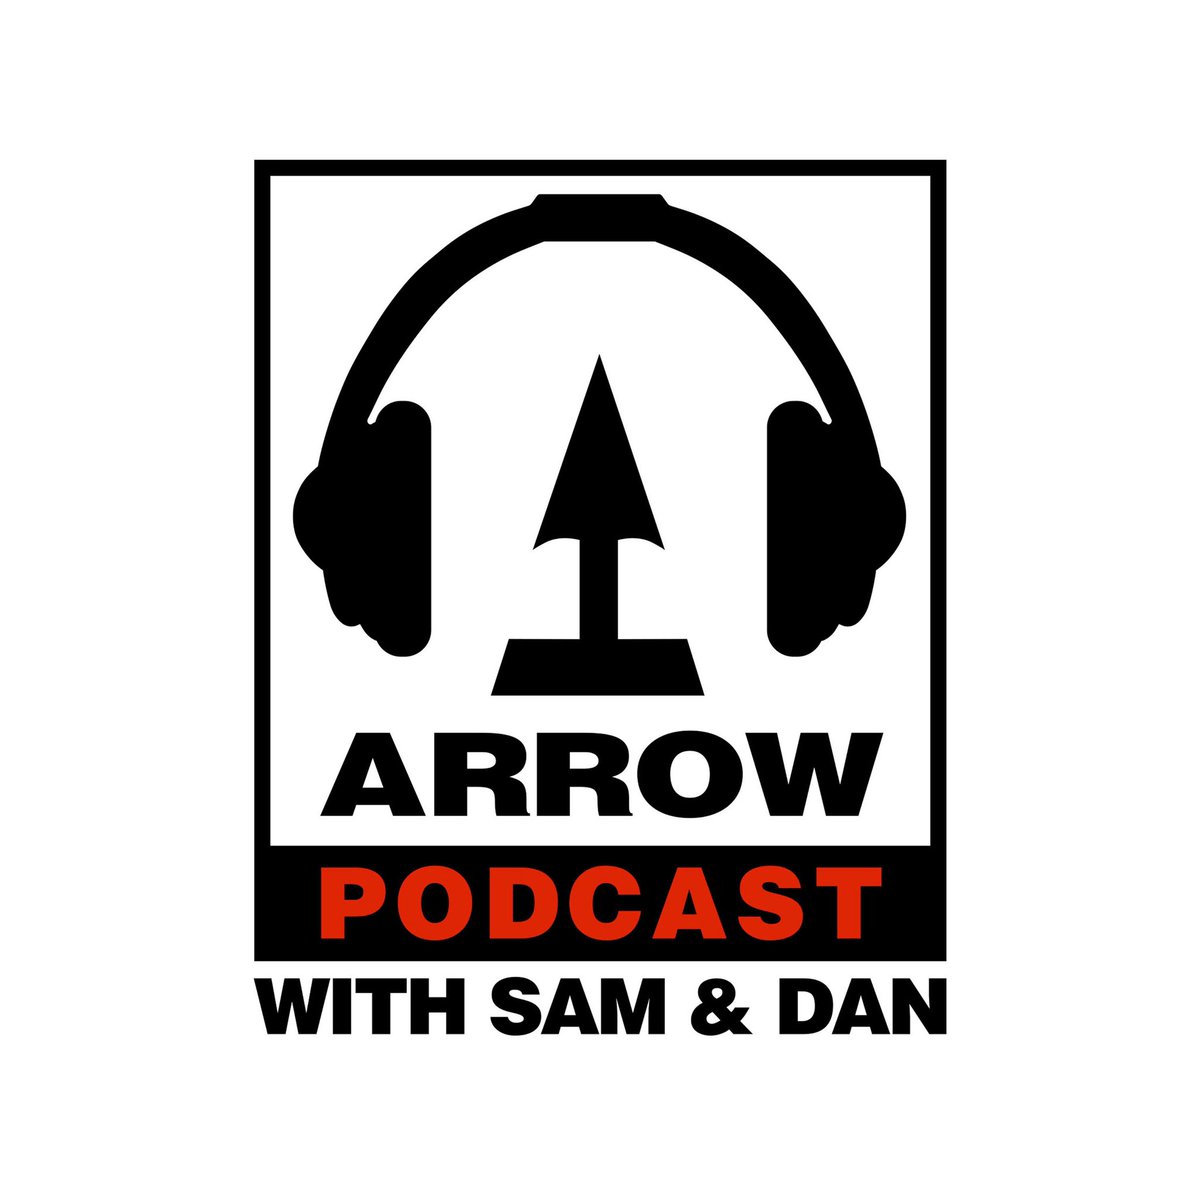 ARROW VIDEO PODCASTNobody knows more about cult & genre movies than  @samashurst &  @13fingerfx. Subscribe to the  @ArrowFilmsVideo podcast for some brilliant recommendations...